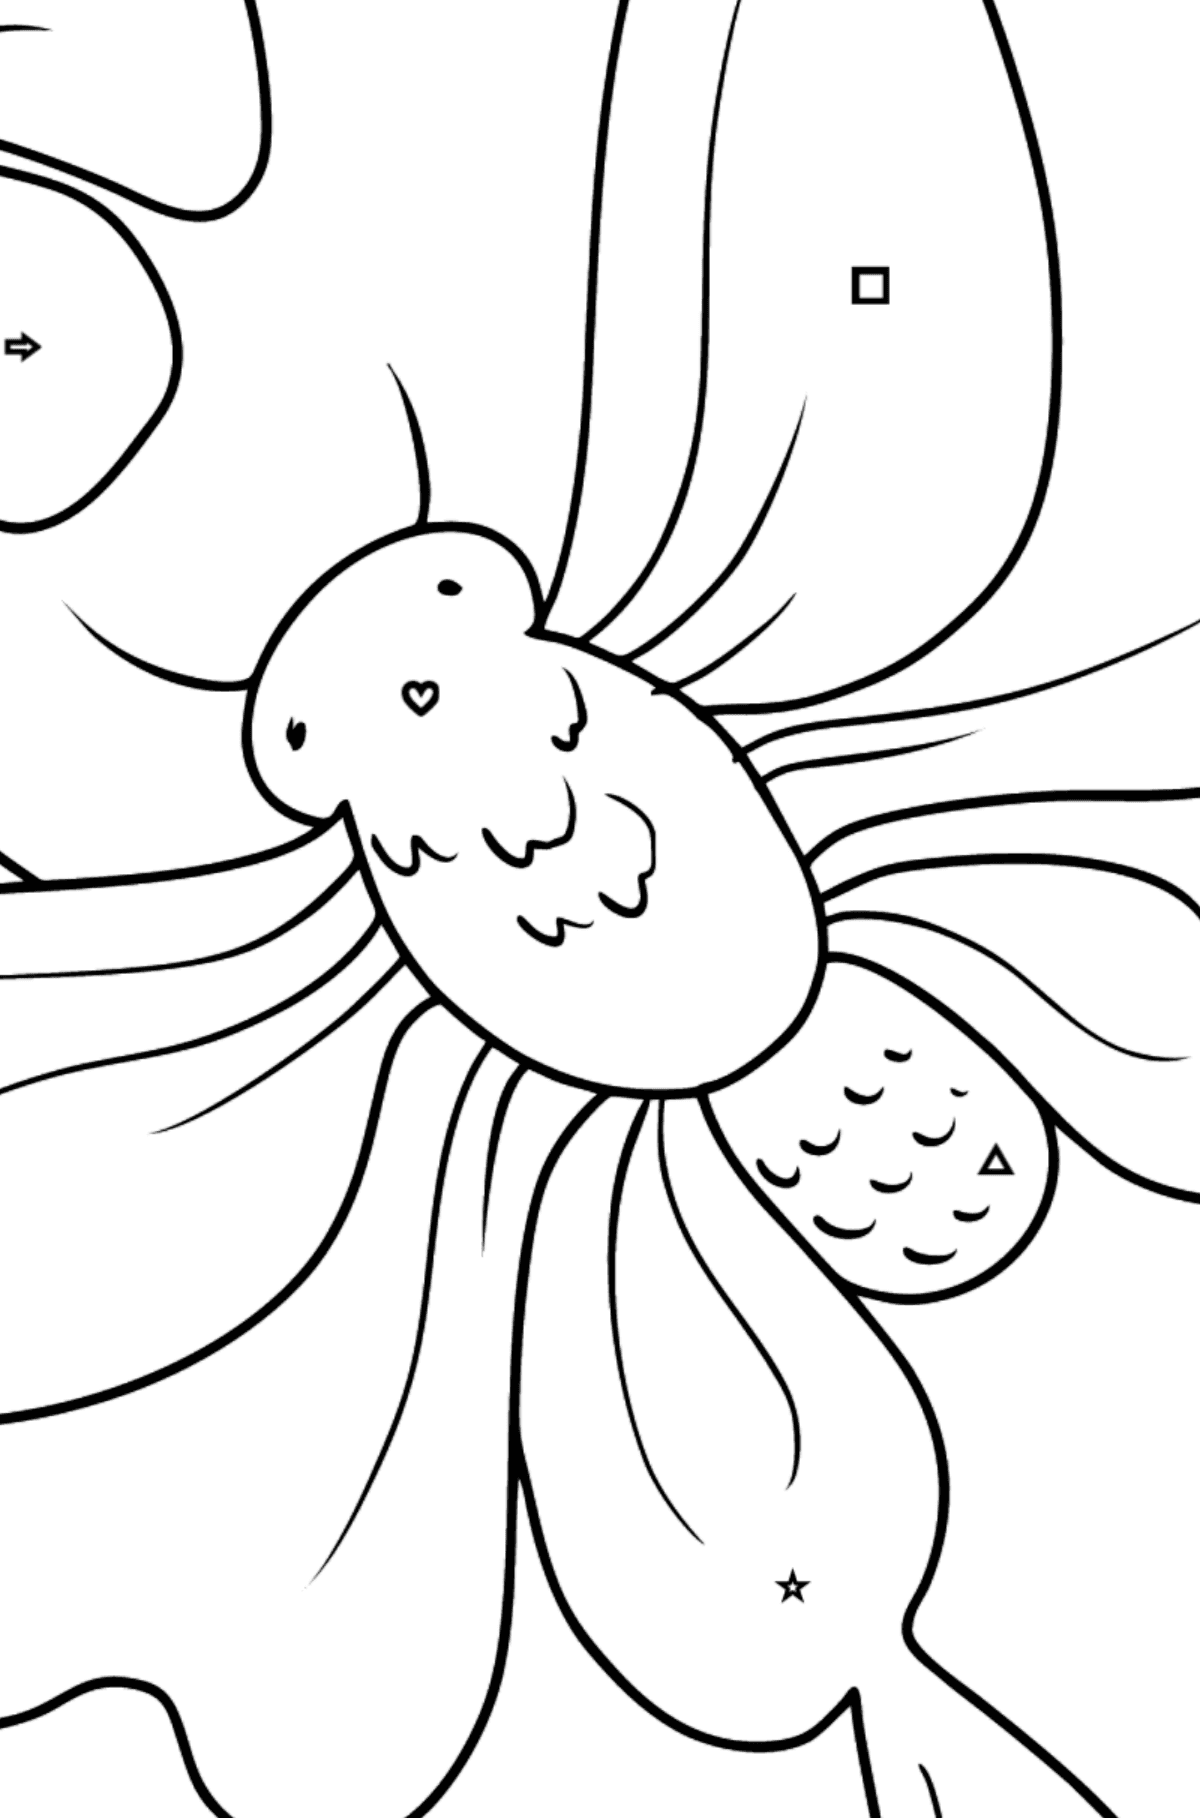 Butterfly on a Flower coloring page - Coloring by Geometric Shapes for Kids